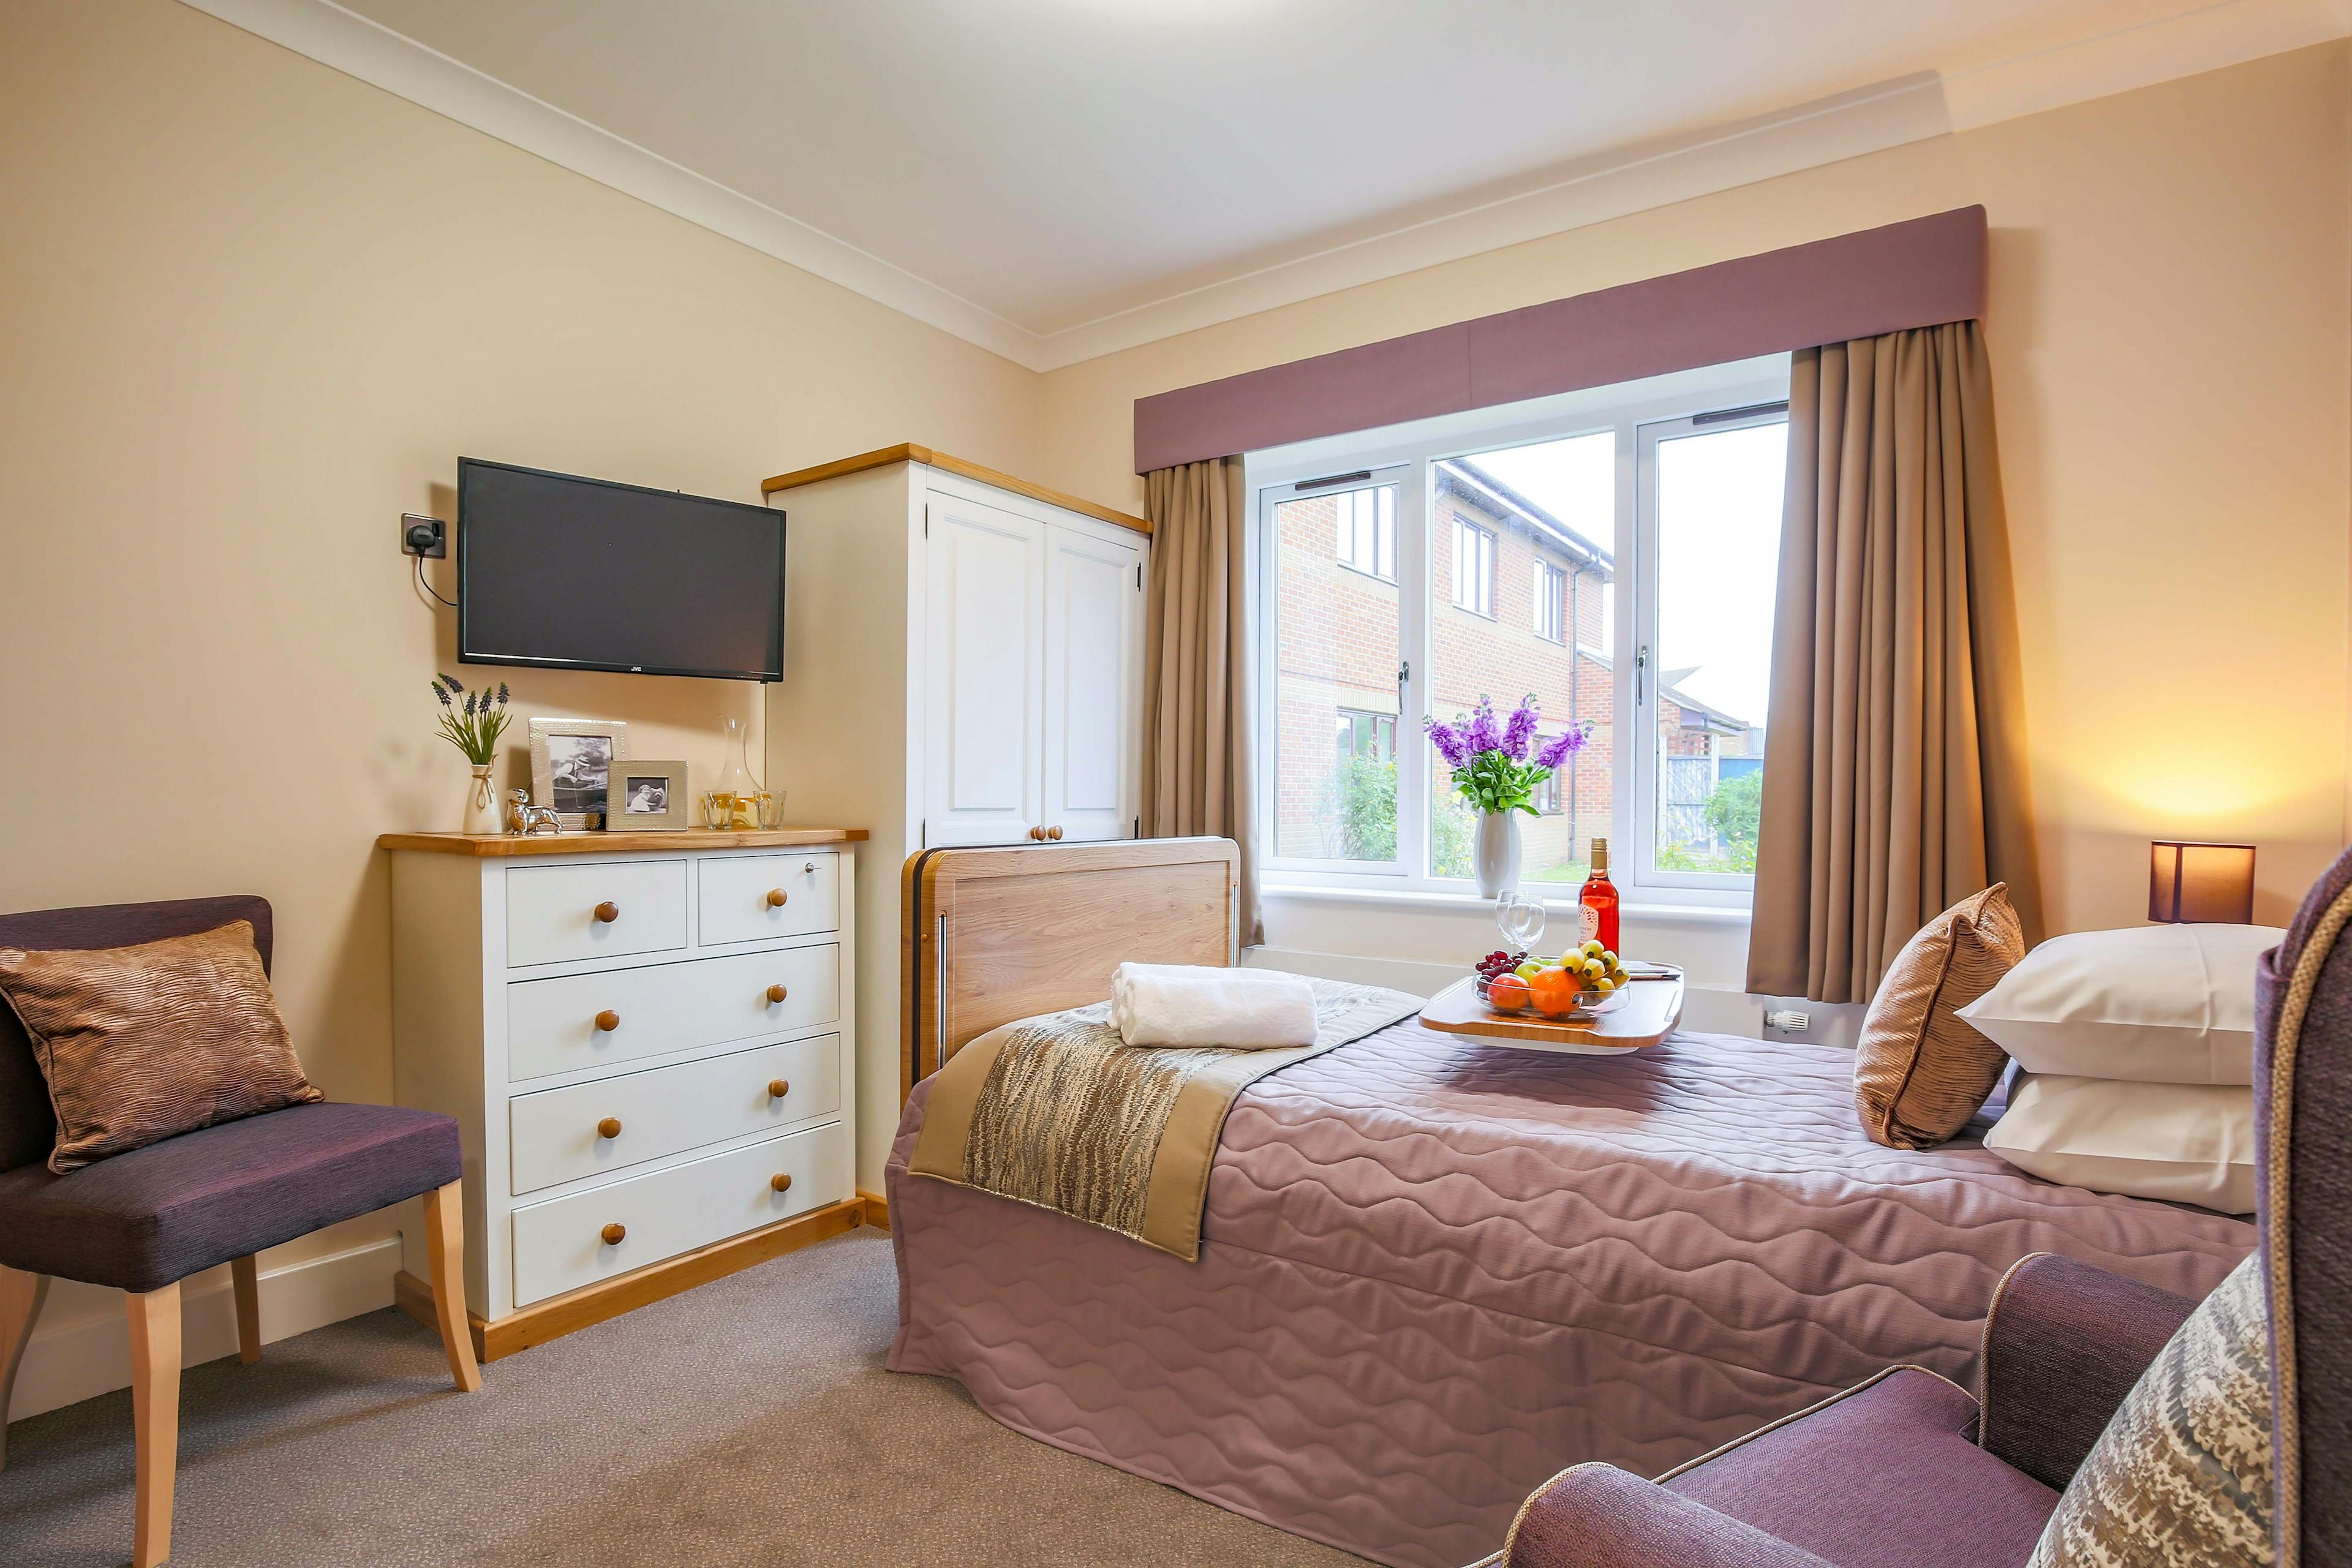 Bedroom at Park View Care Home in Barking and Dagenham, Greater London